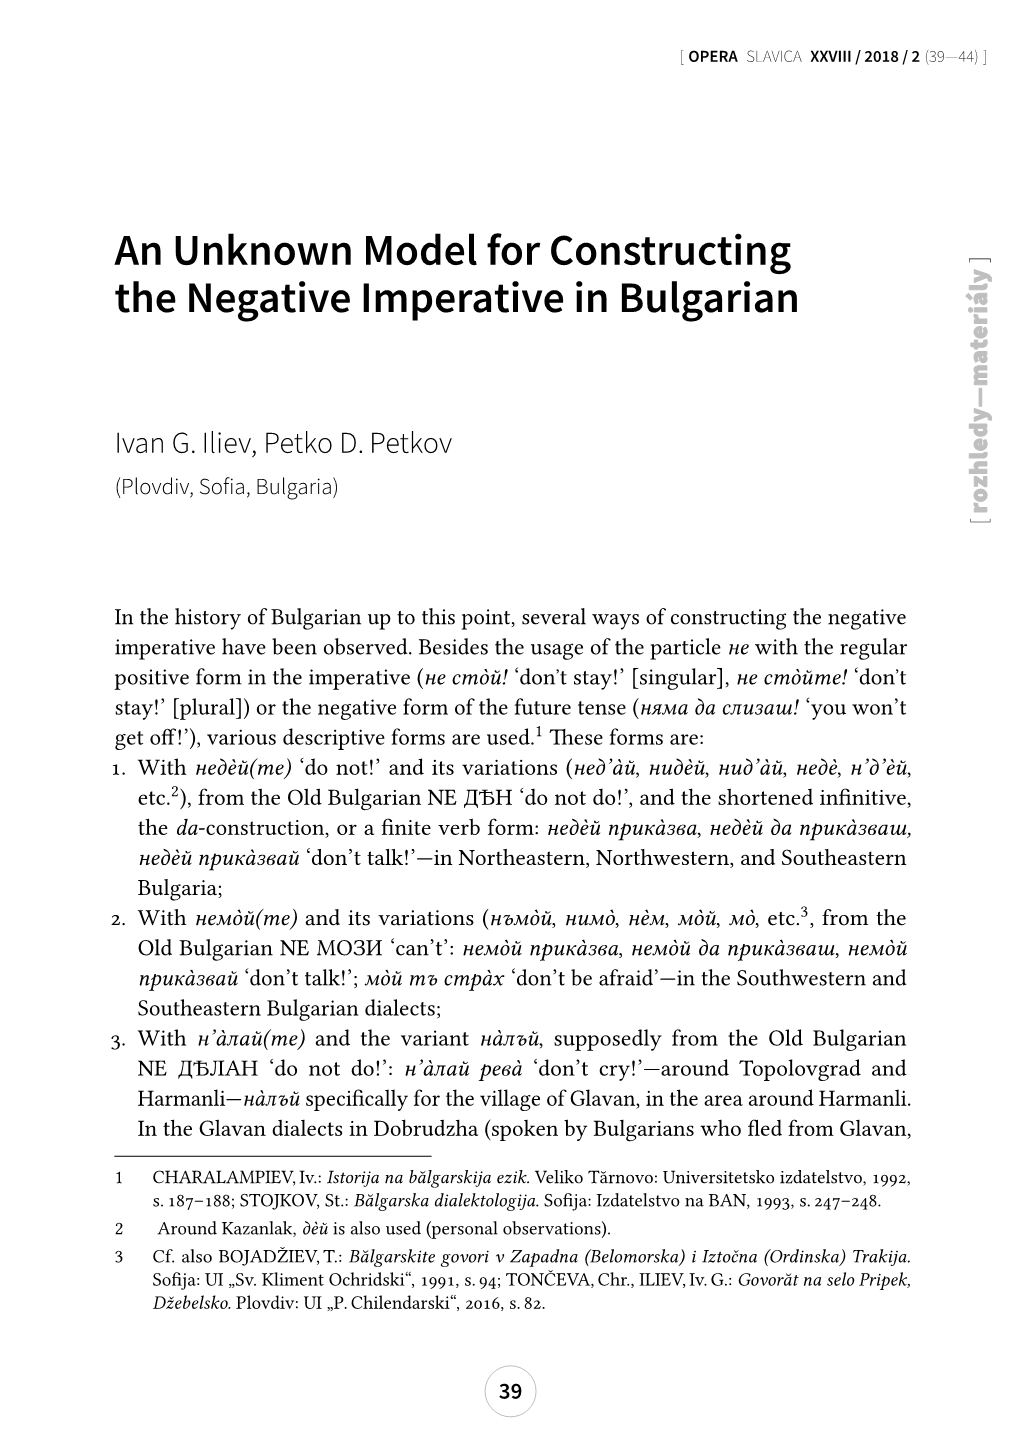 An Unknown Model for Constructing the Negative Imperative in Bulgarian